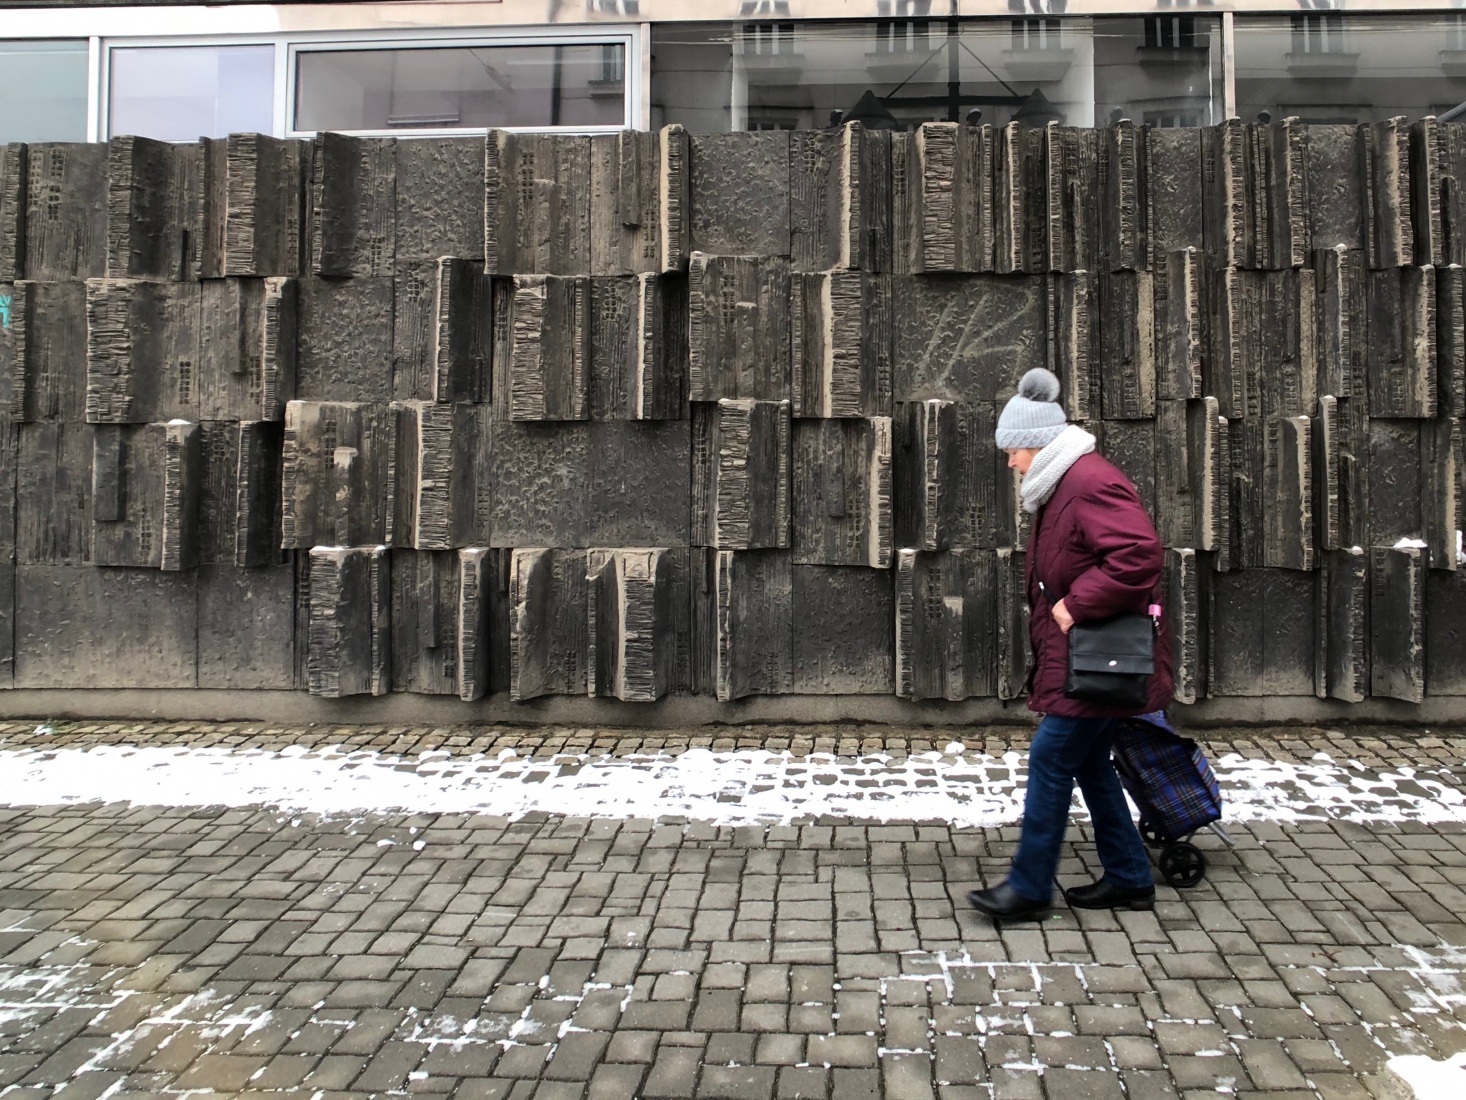 Brutalist wall design from the 1970s or 1980s architectural movement, in Ostrava, Czech Republic.